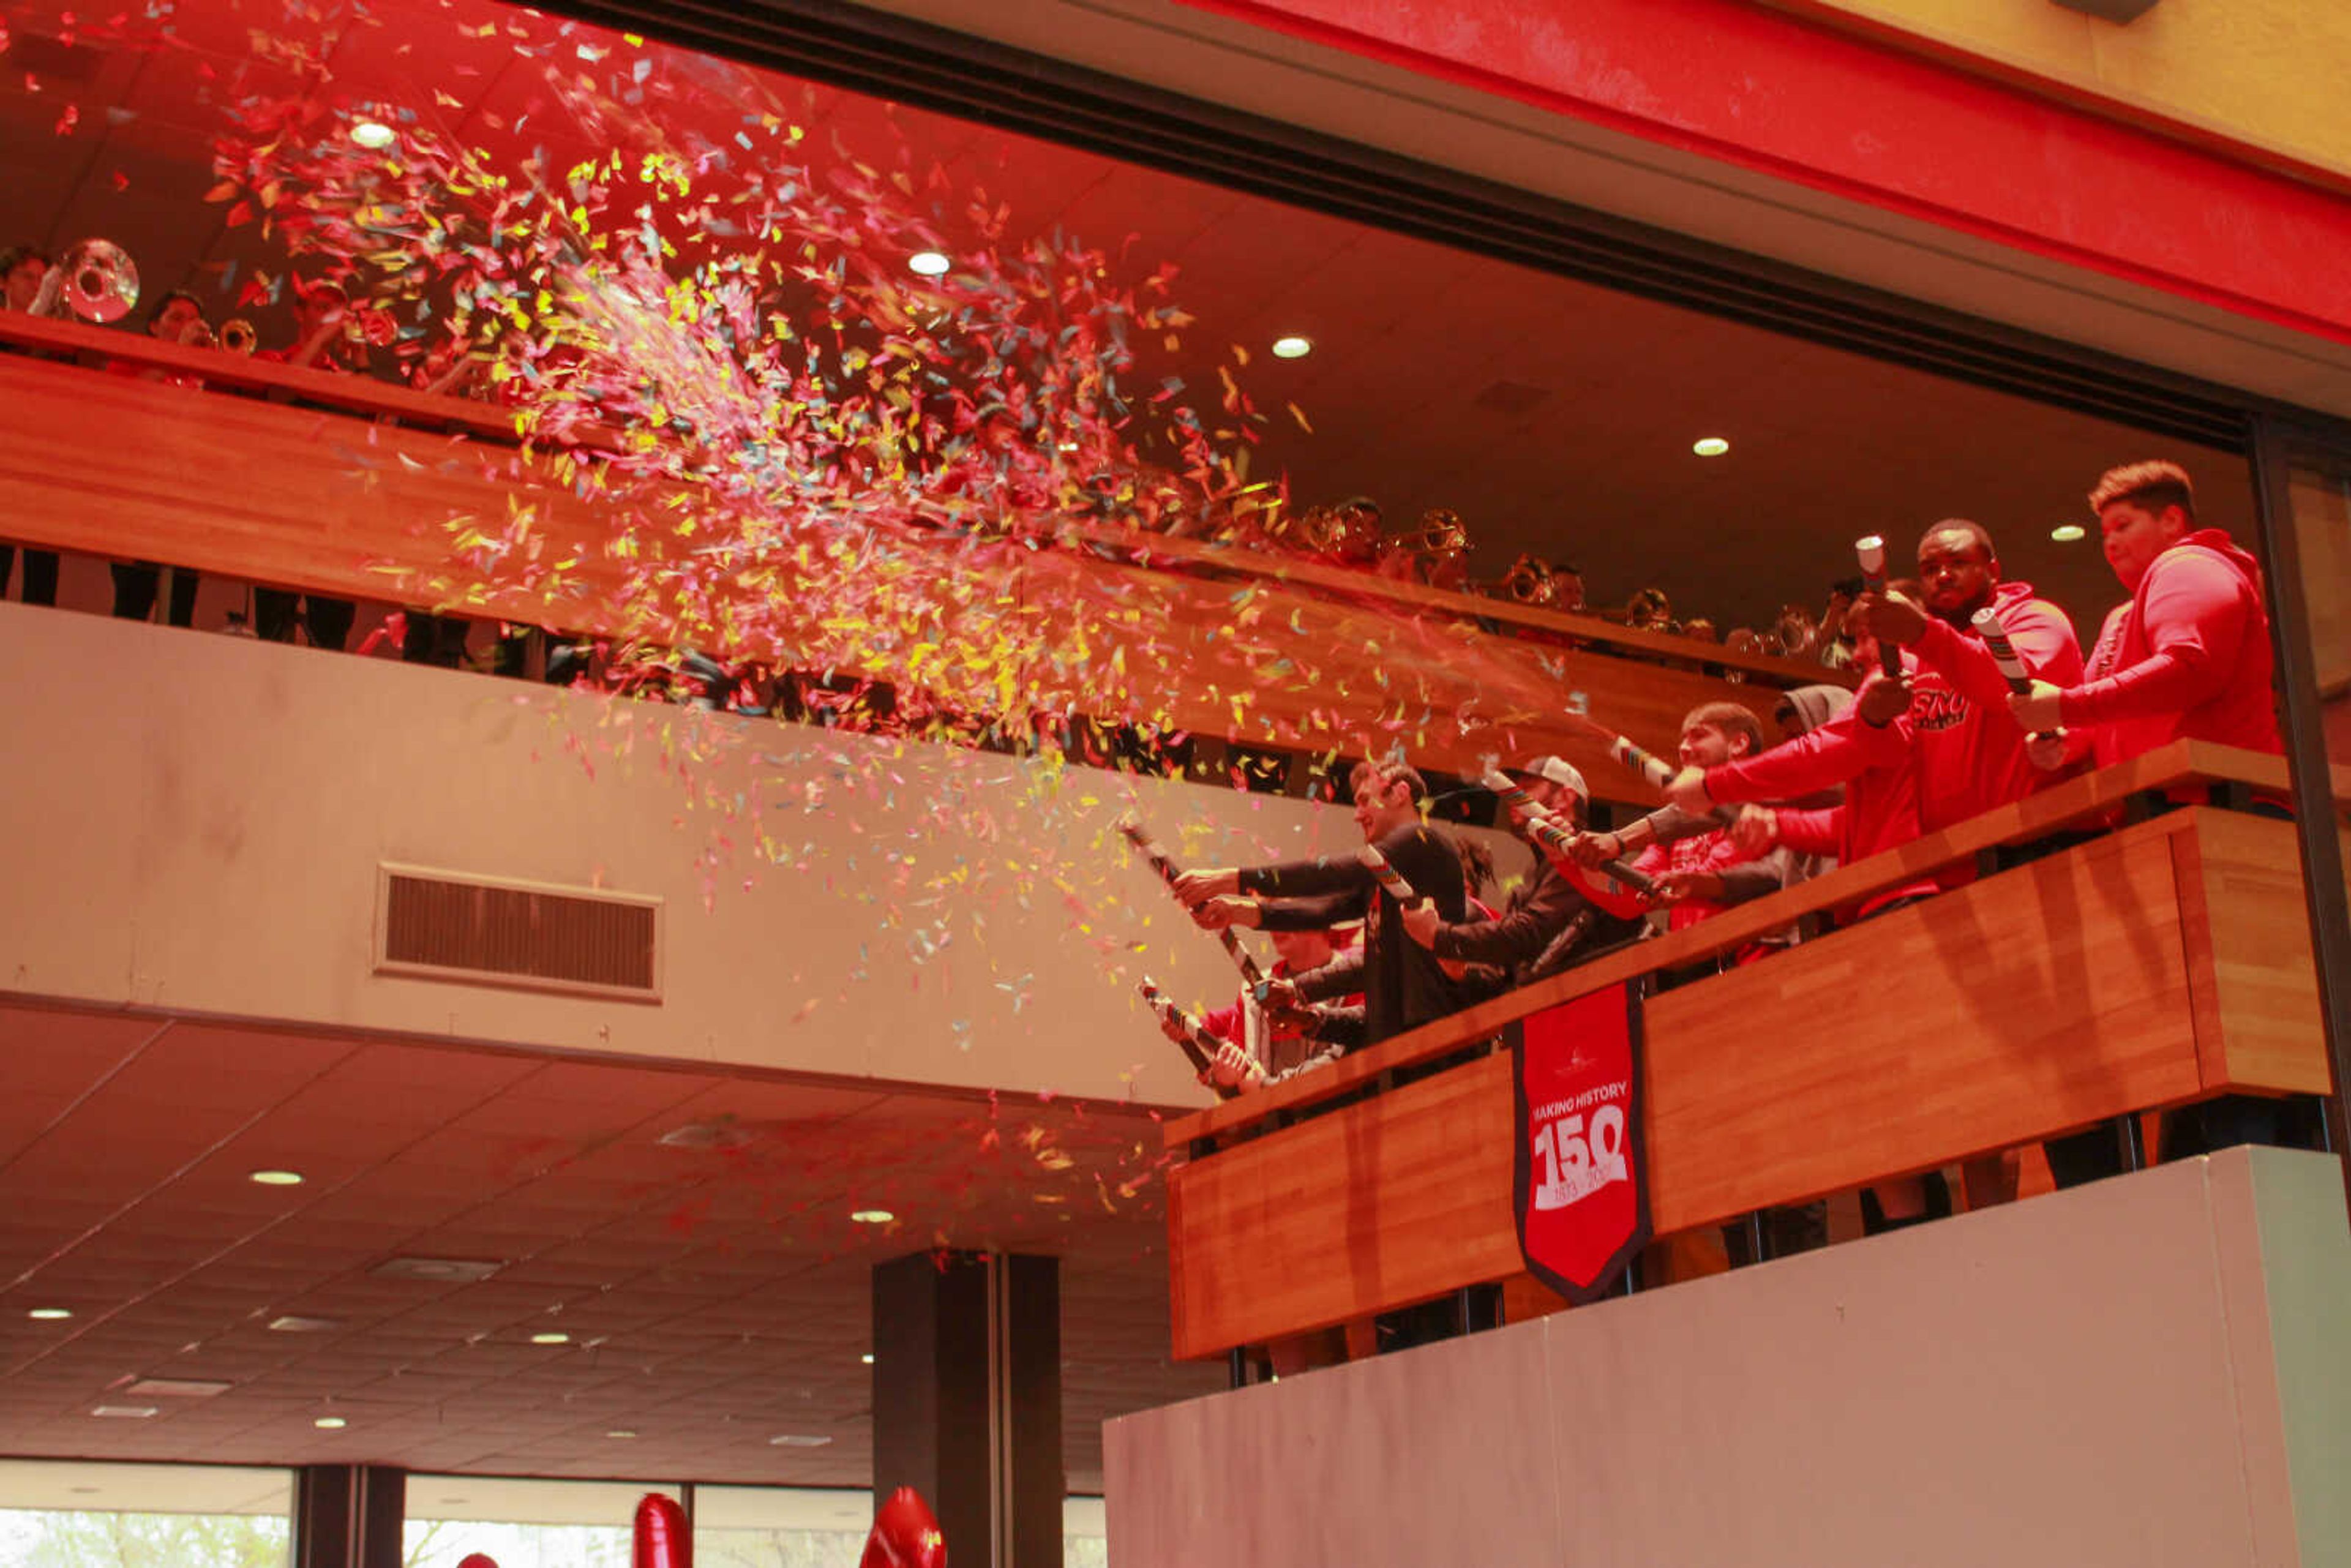 Campus-wide birthday party held in celebration 150 years of SEMO